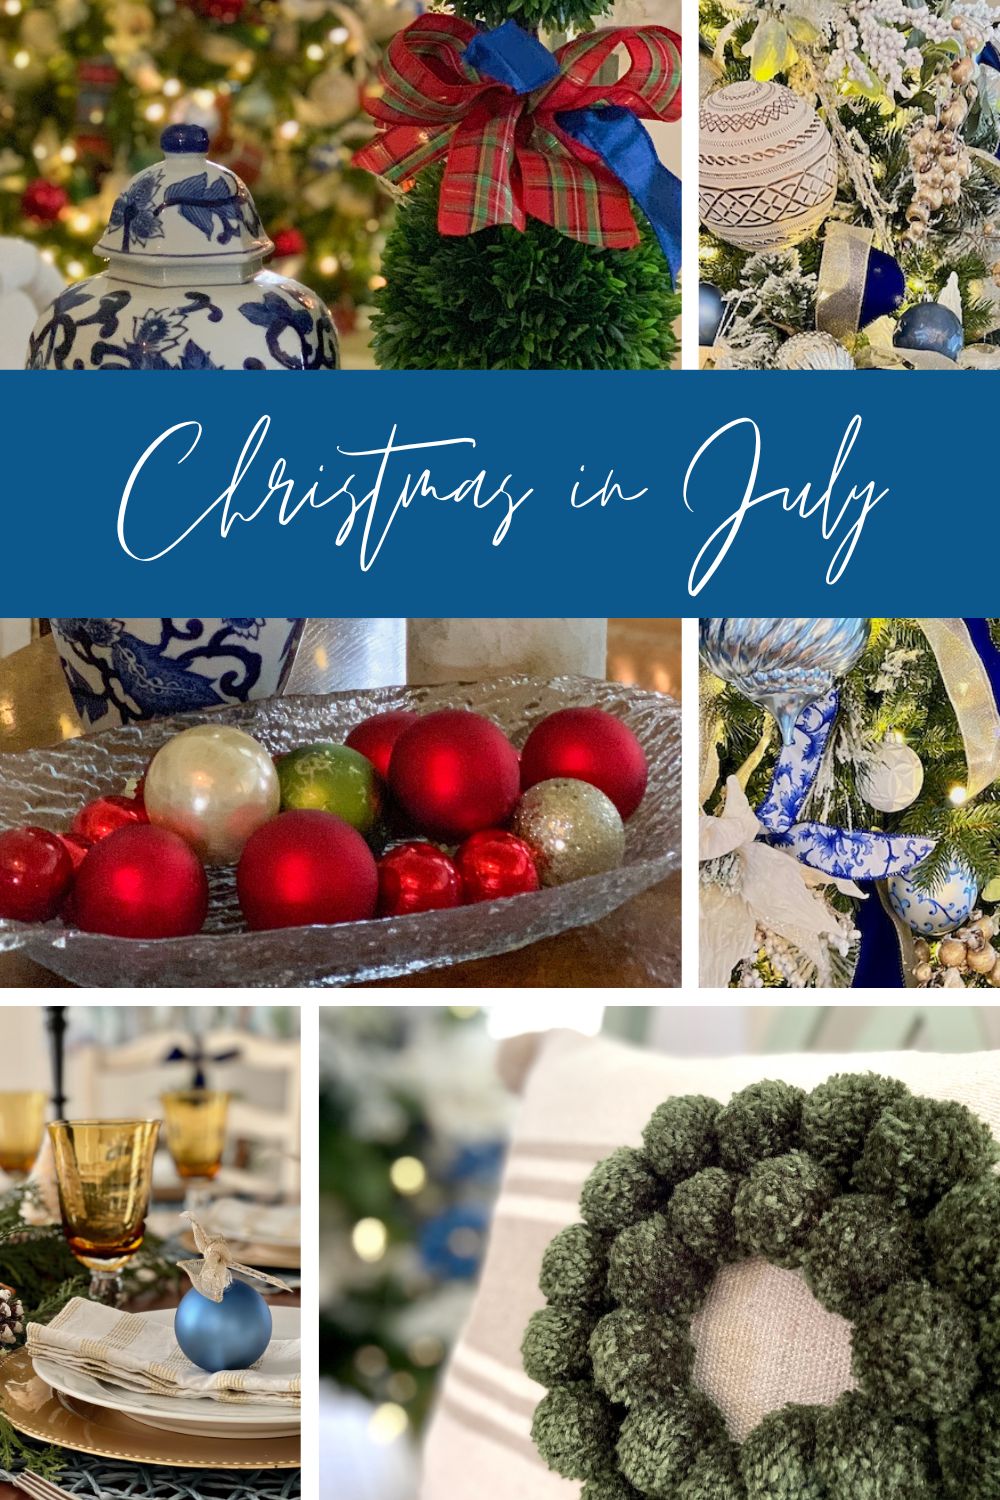 Start Planning Your Christmas Decorations in July!